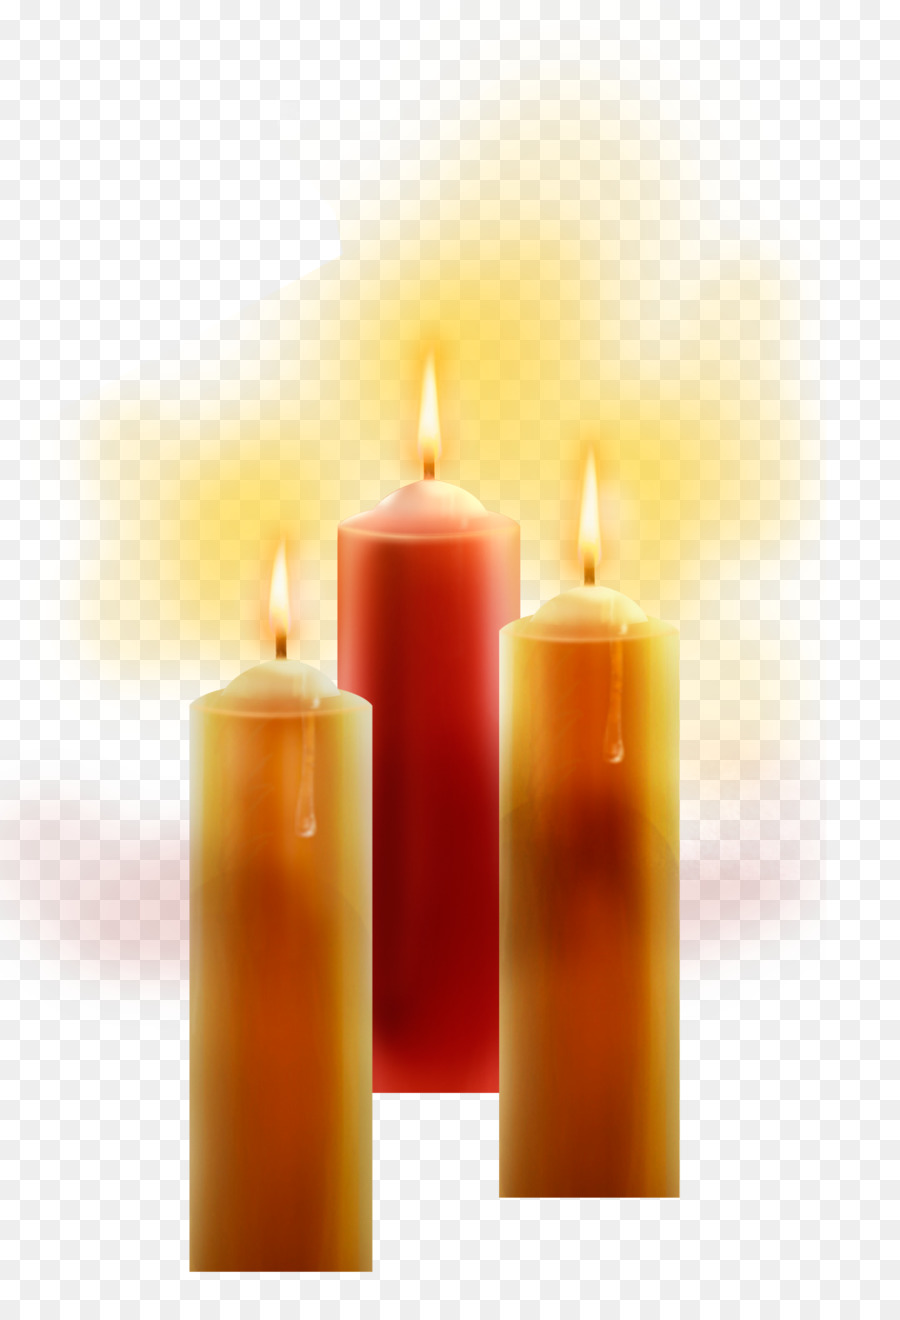 Candle Computer Icons Clip art - candles png download - 1273*1843 - Free Transparent Candle png Download.